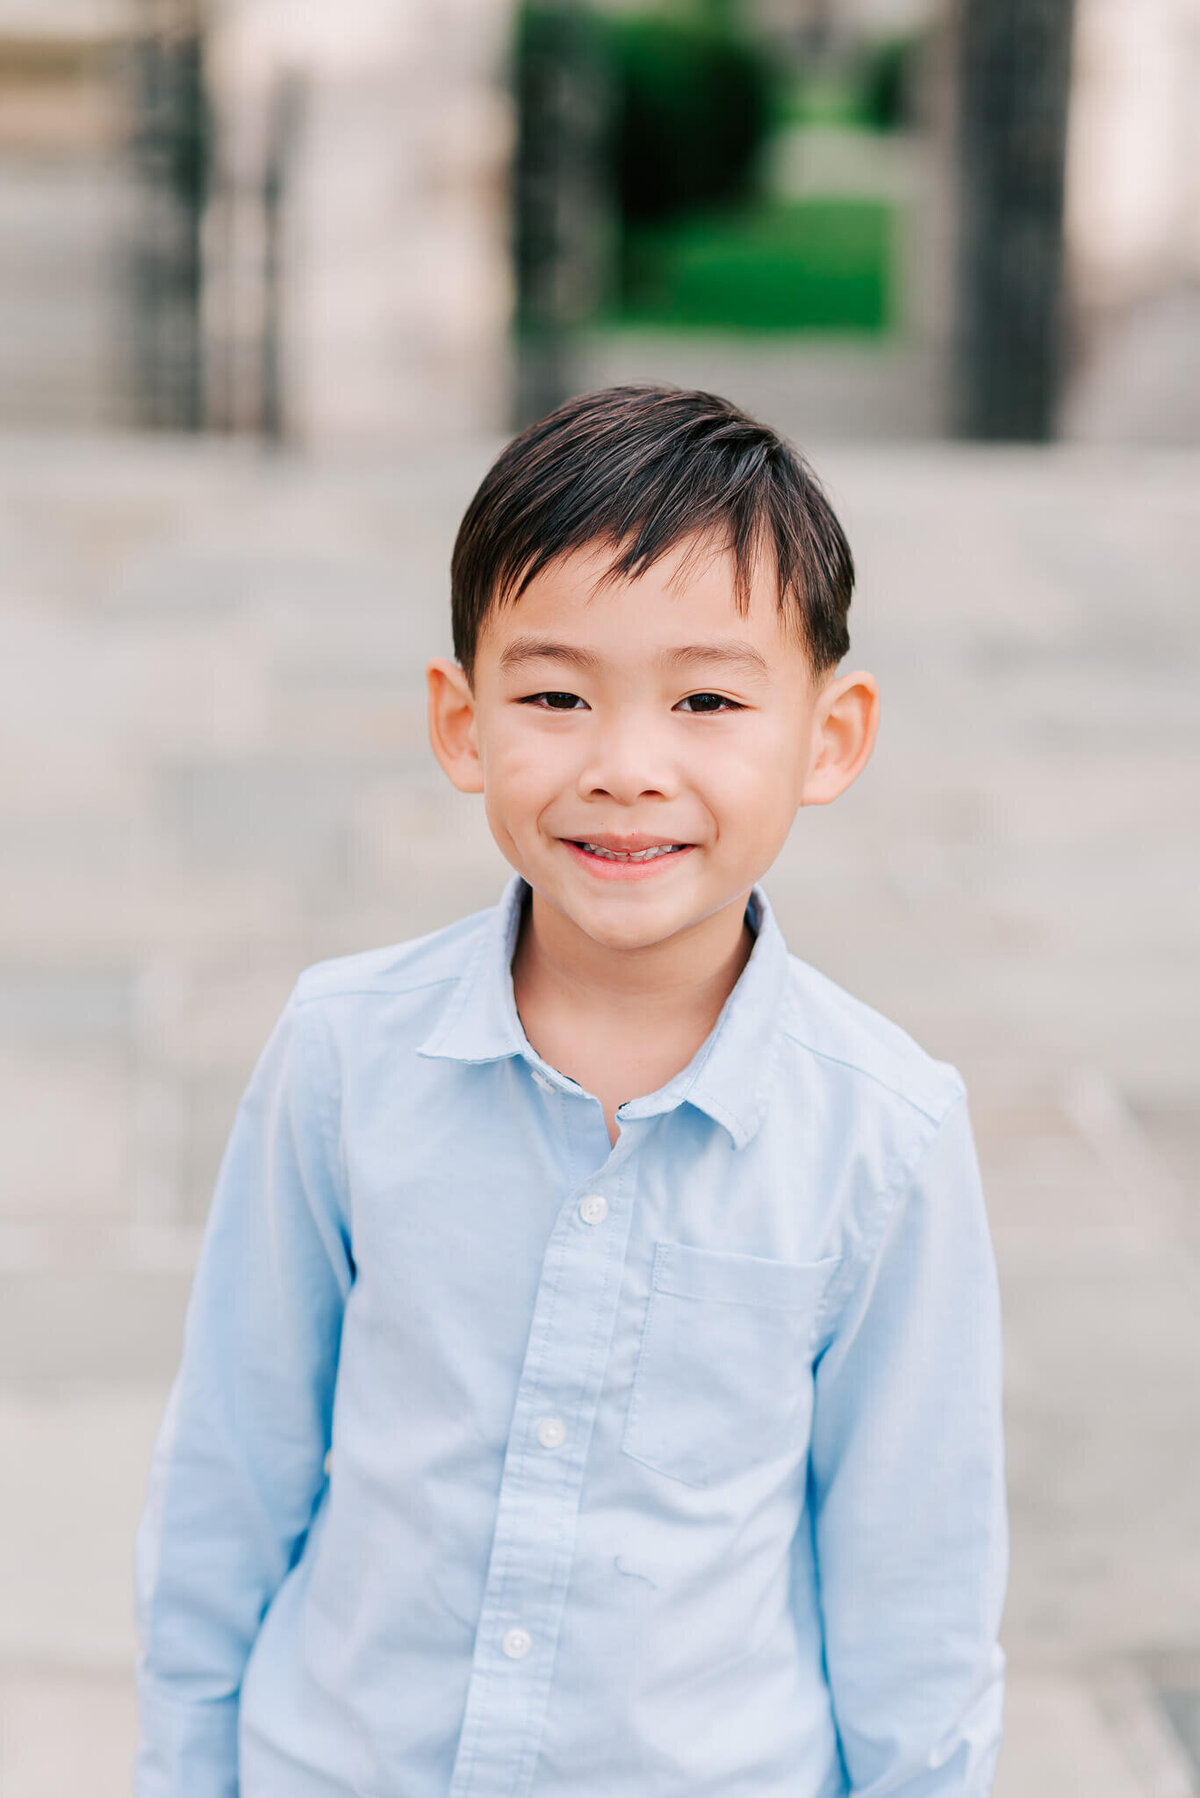 An outdoor Denise Van Photography portrait of a young boy wearing a blue button-down